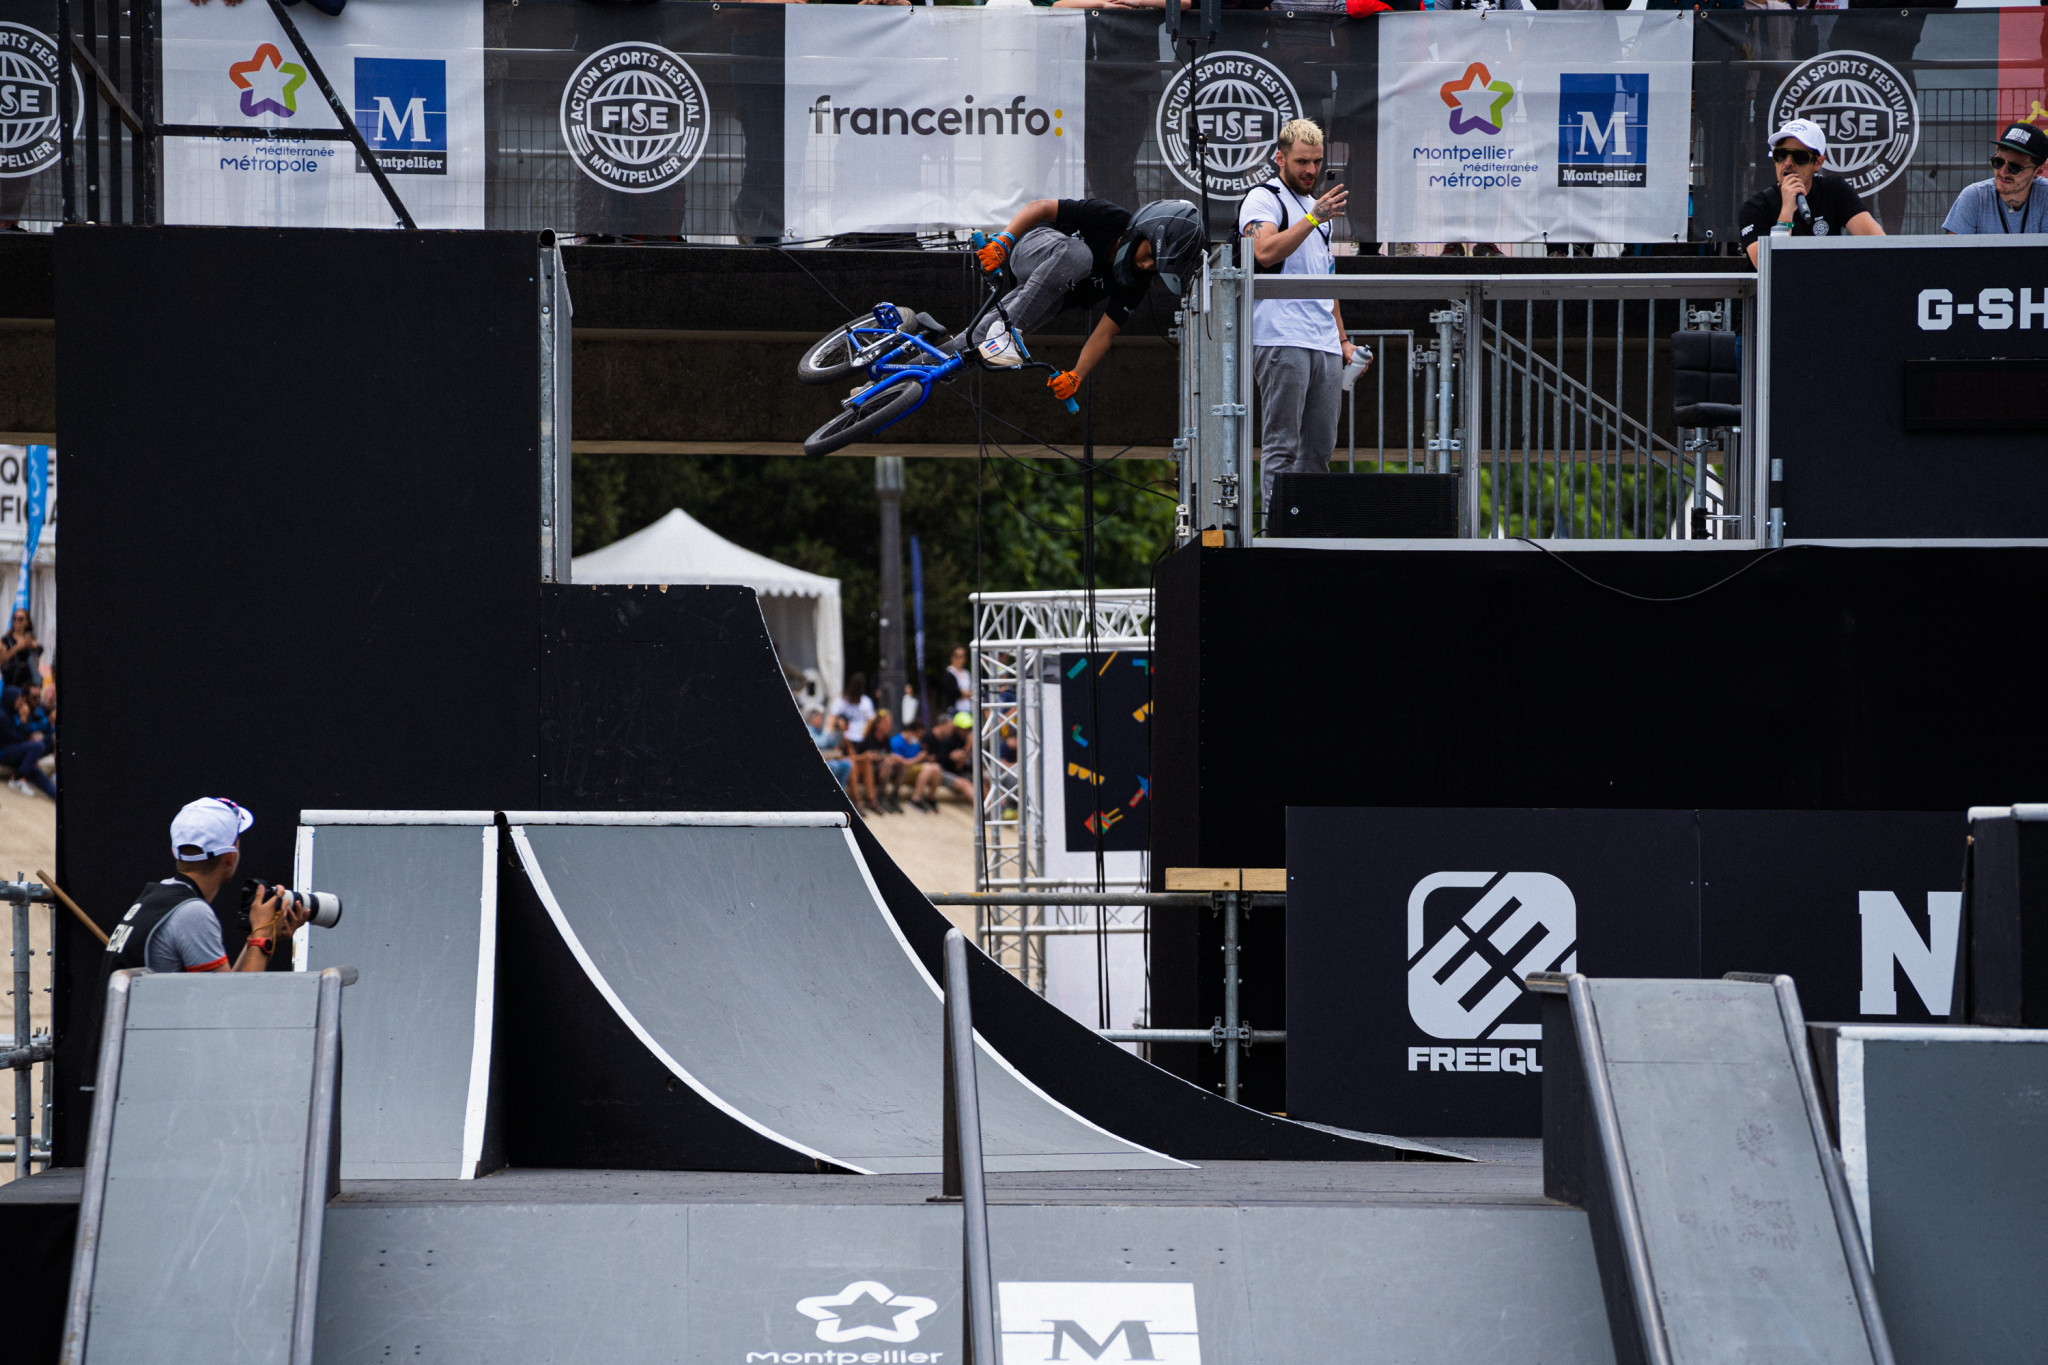 The second day of the International Extreme Sports Festival (FISE) also took place in Montpellier as it is running parallel to the Urban Sports Summit ©Hurricane - FISE